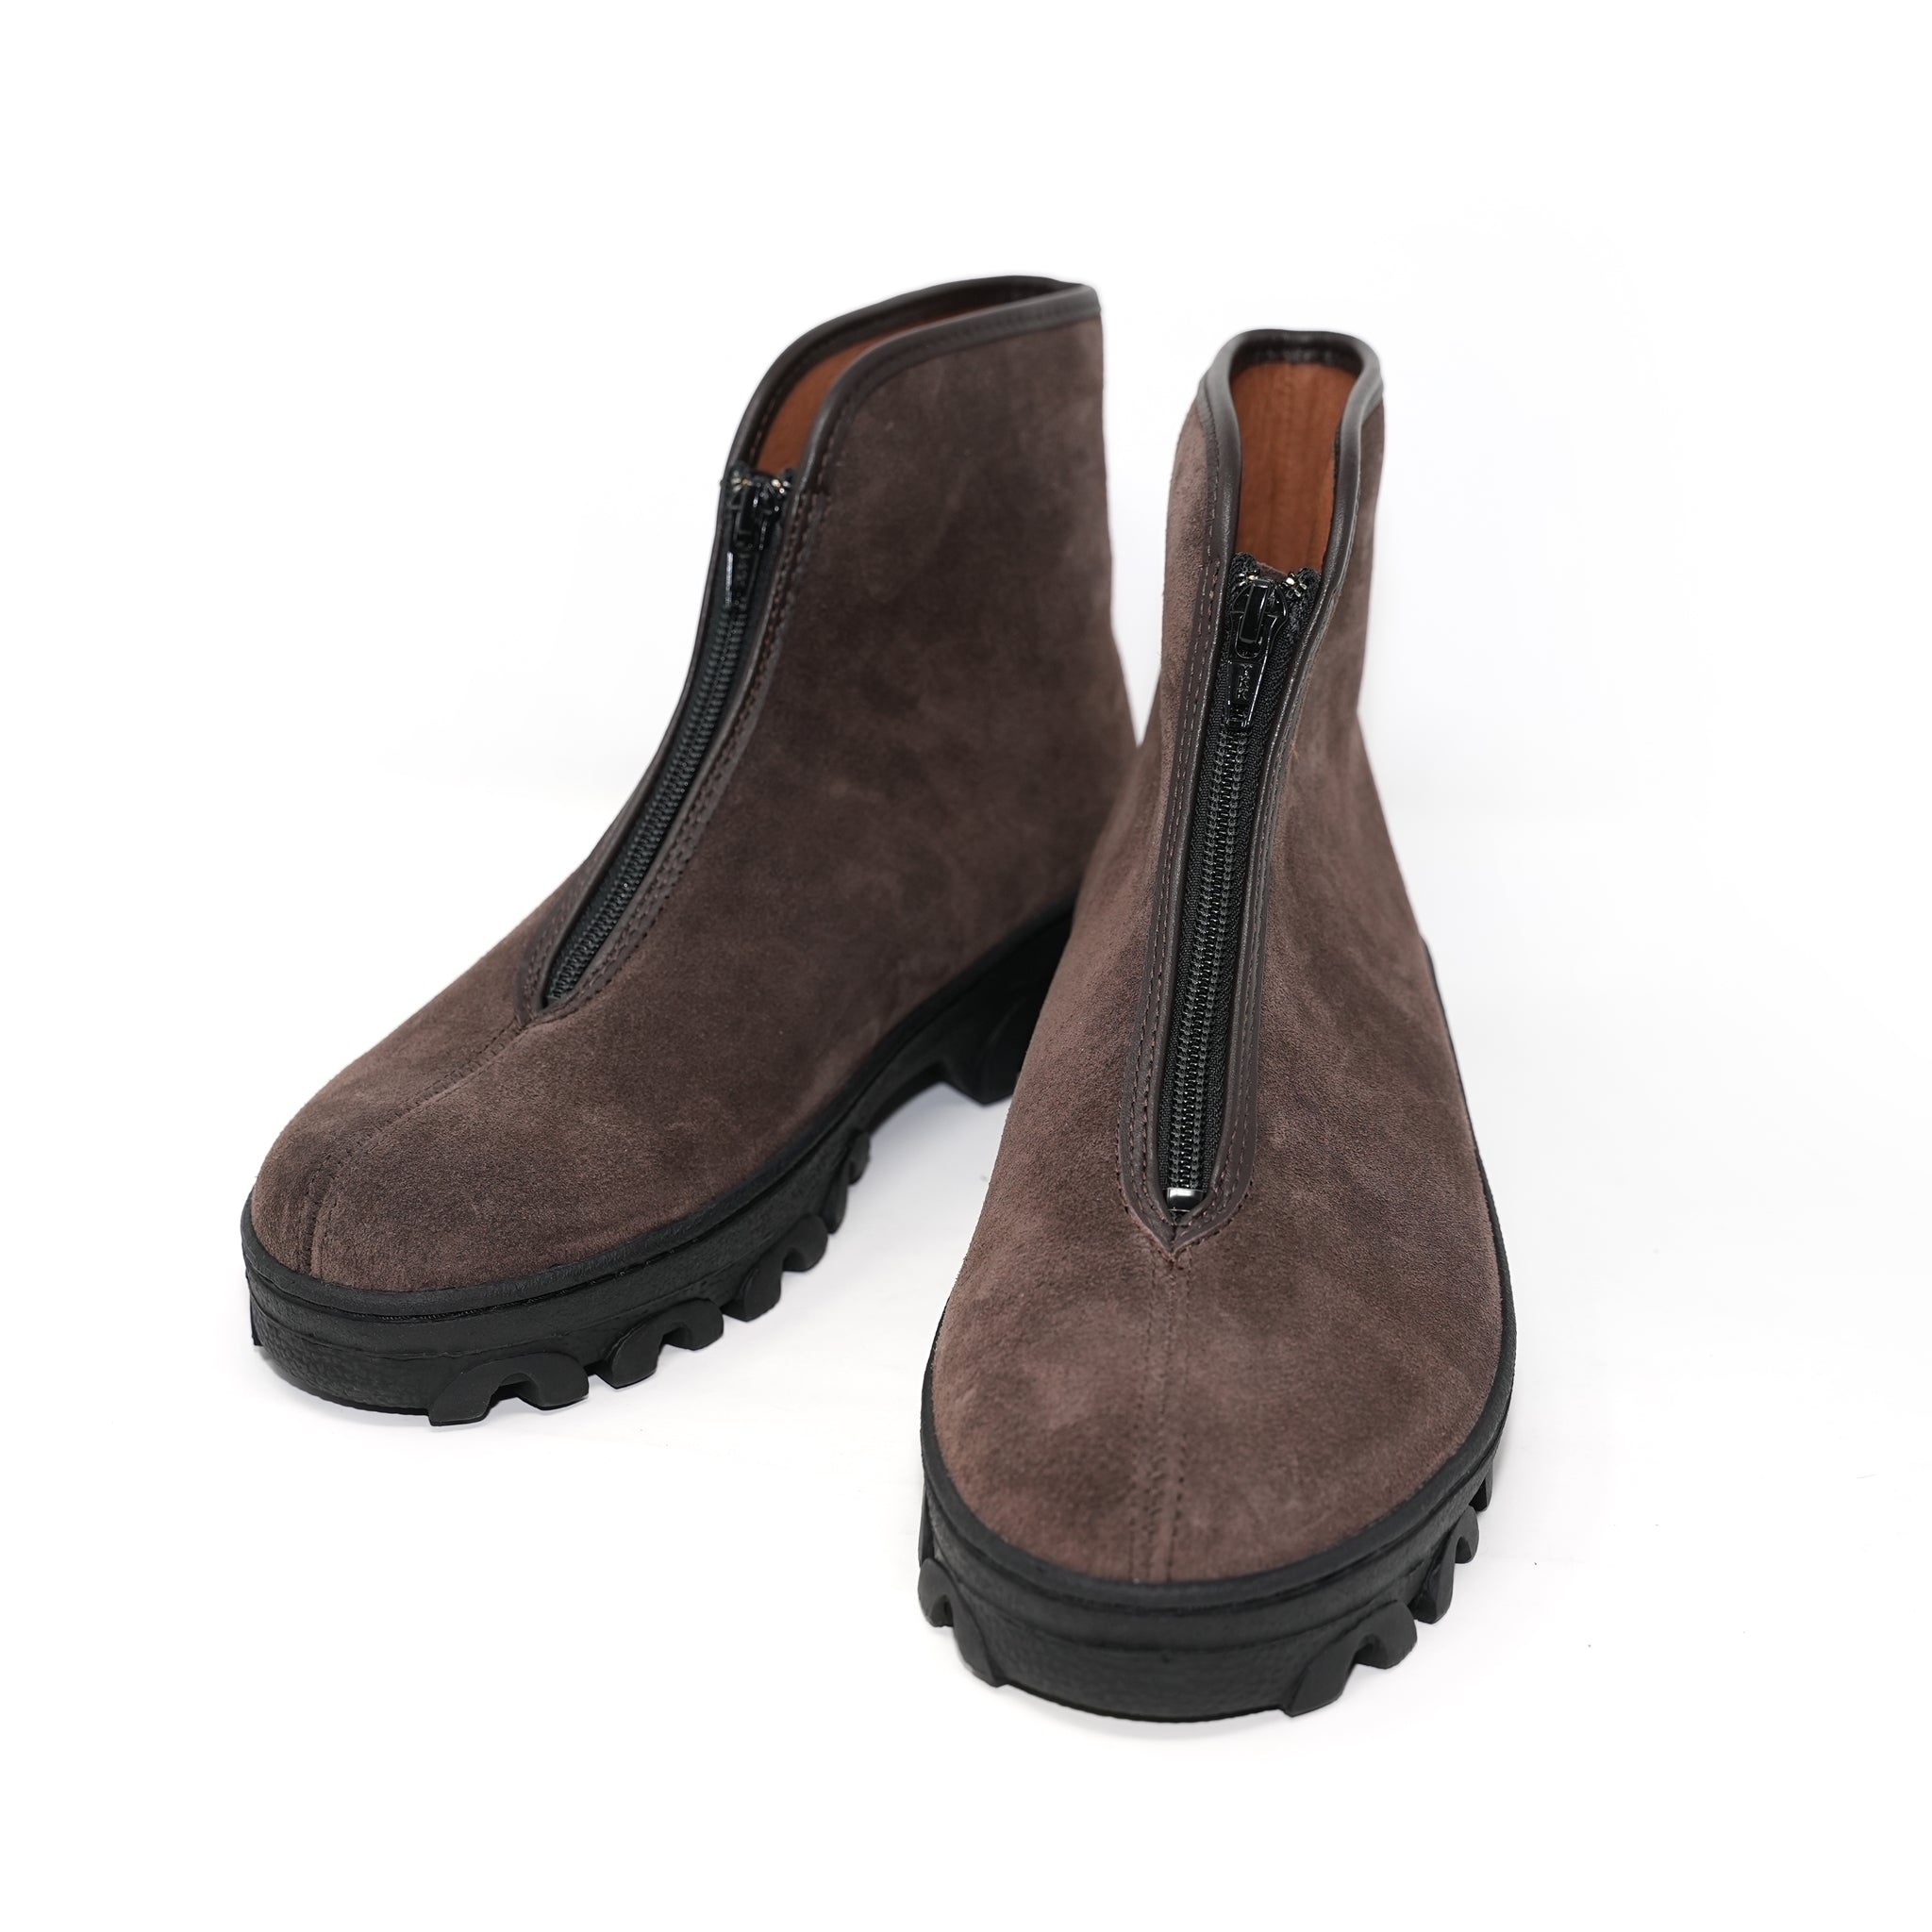 No:540SSA | Name:RUSSIAN MILITARY BOOTS | Color:Dark Brown Suede【REPRODUCTION OF FOUND_リプロダクションオブファウンド】